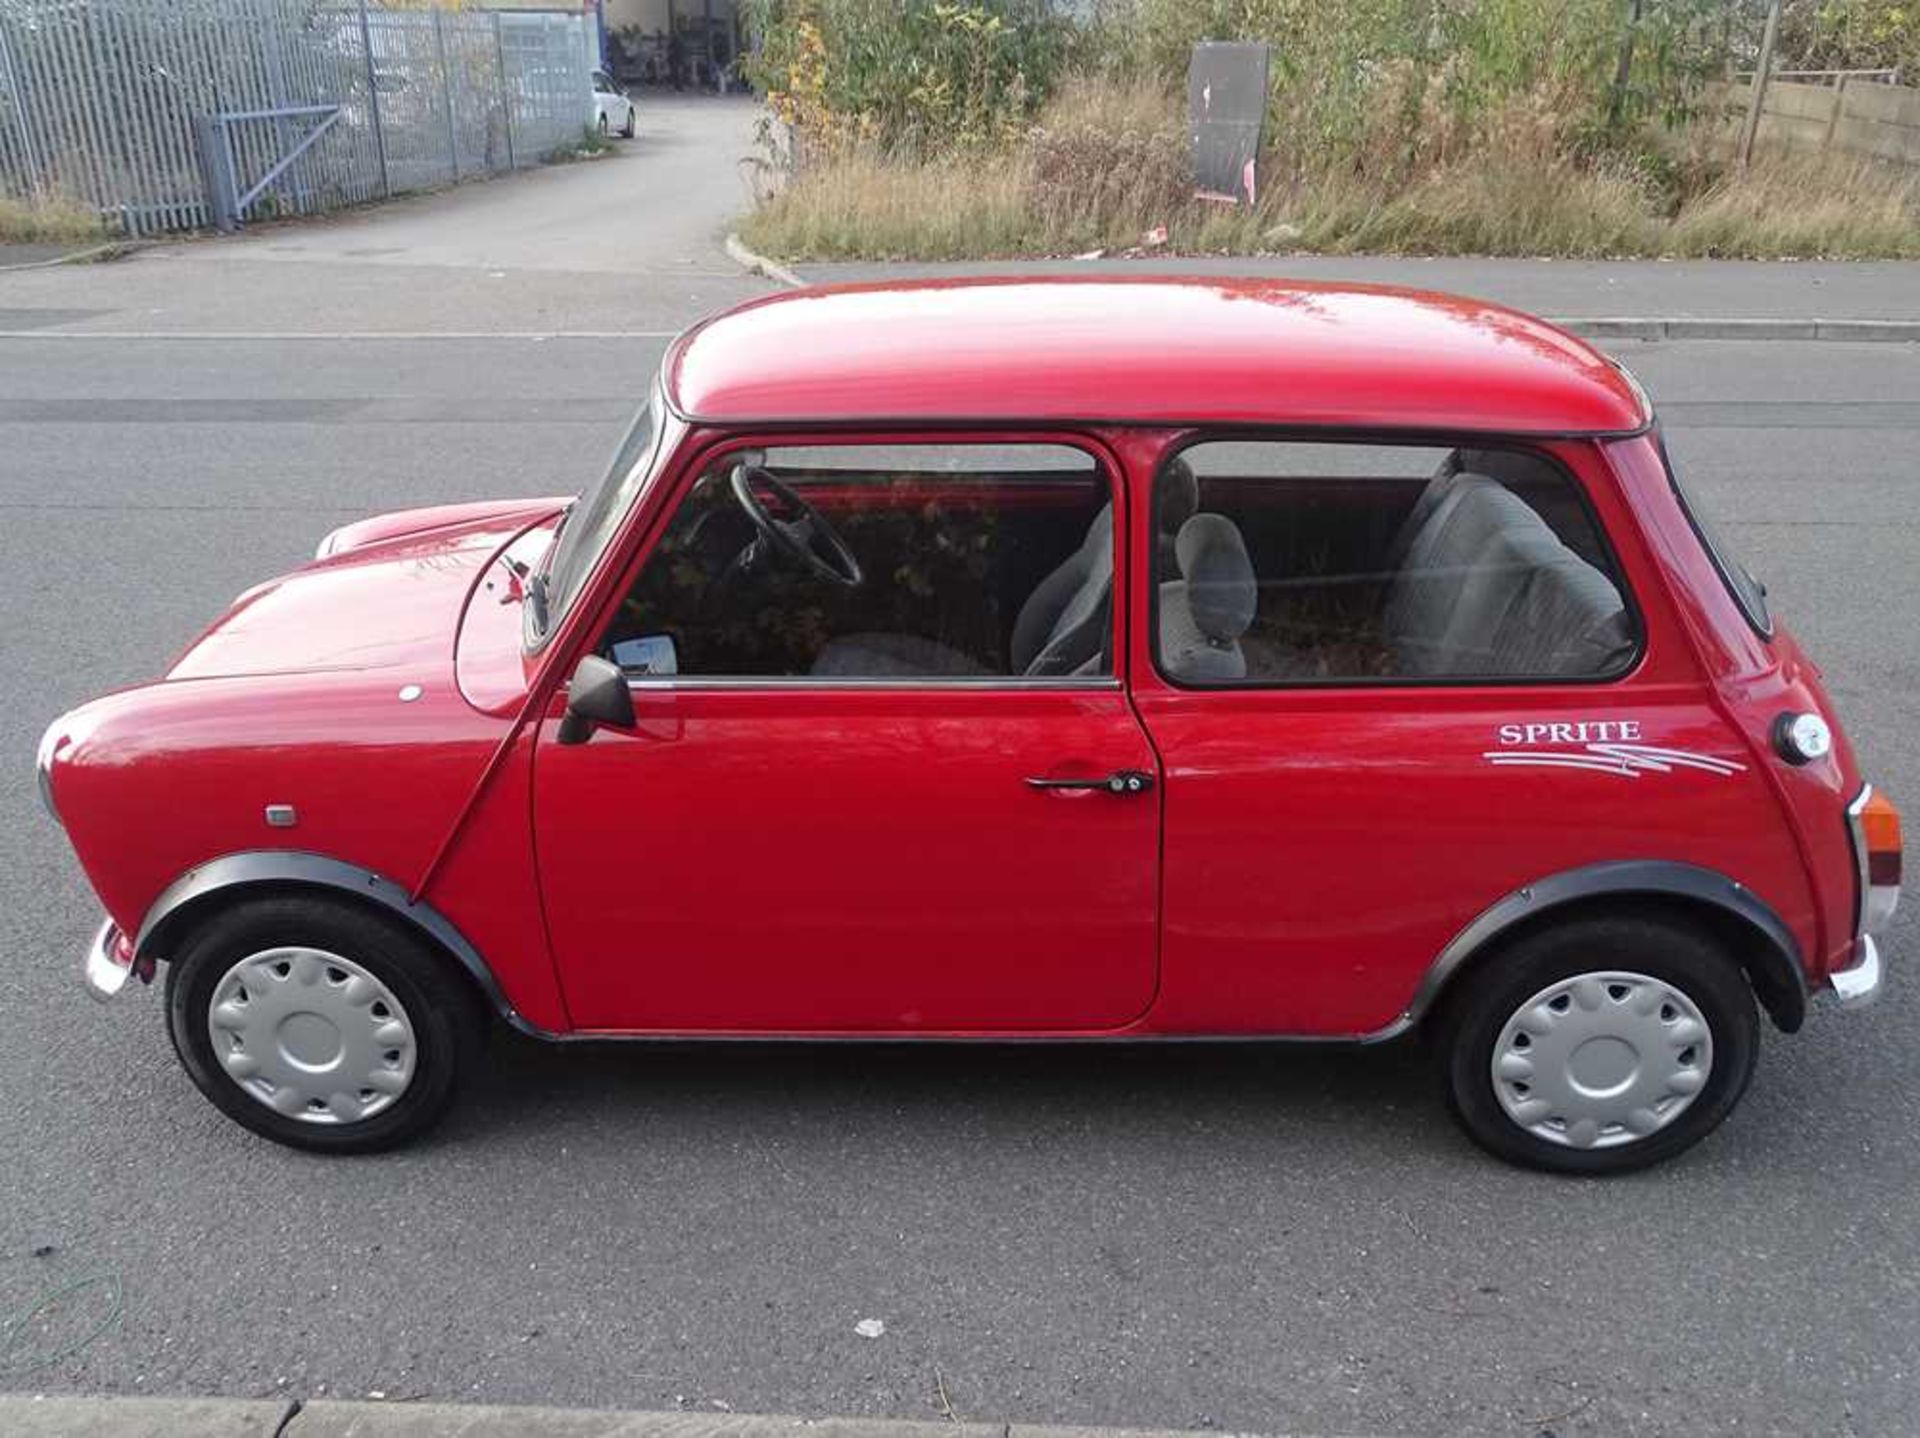 1995 Rover Mini Sprite Only c.22,500 miles from new - Image 8 of 52